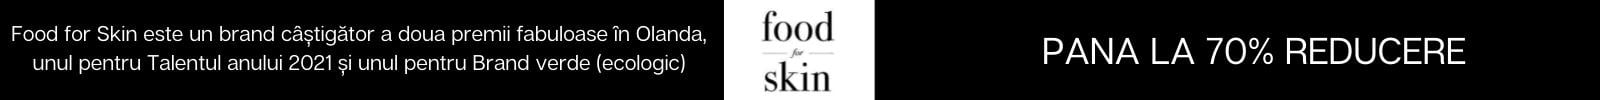 FOOD FOR SKIN